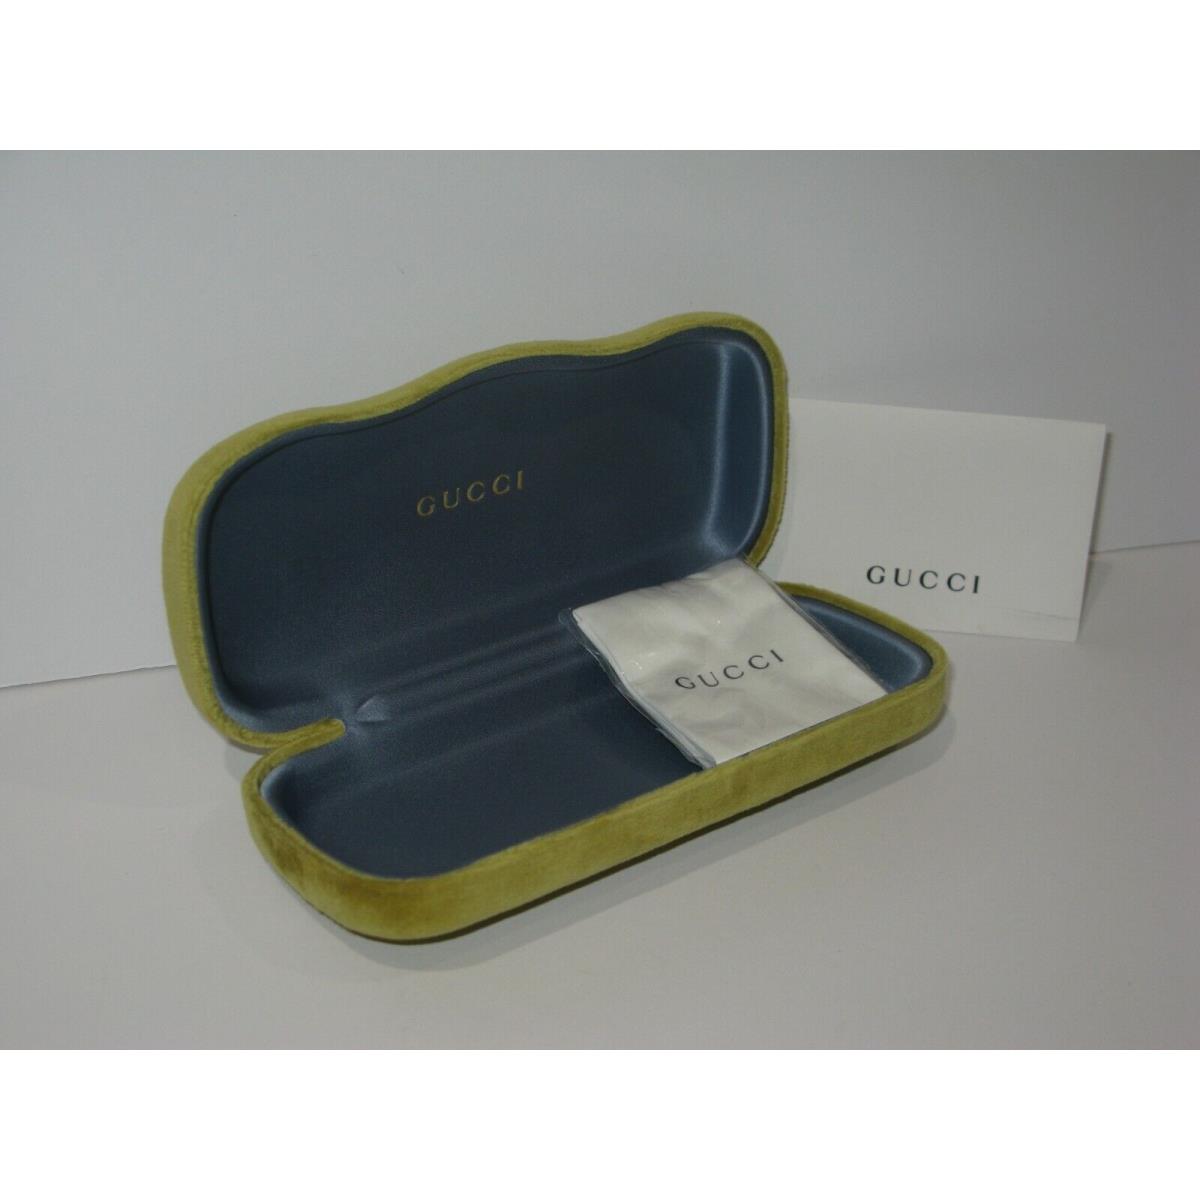 Gucci Eyeglasses/sunglasses Light Green Case with Cloth